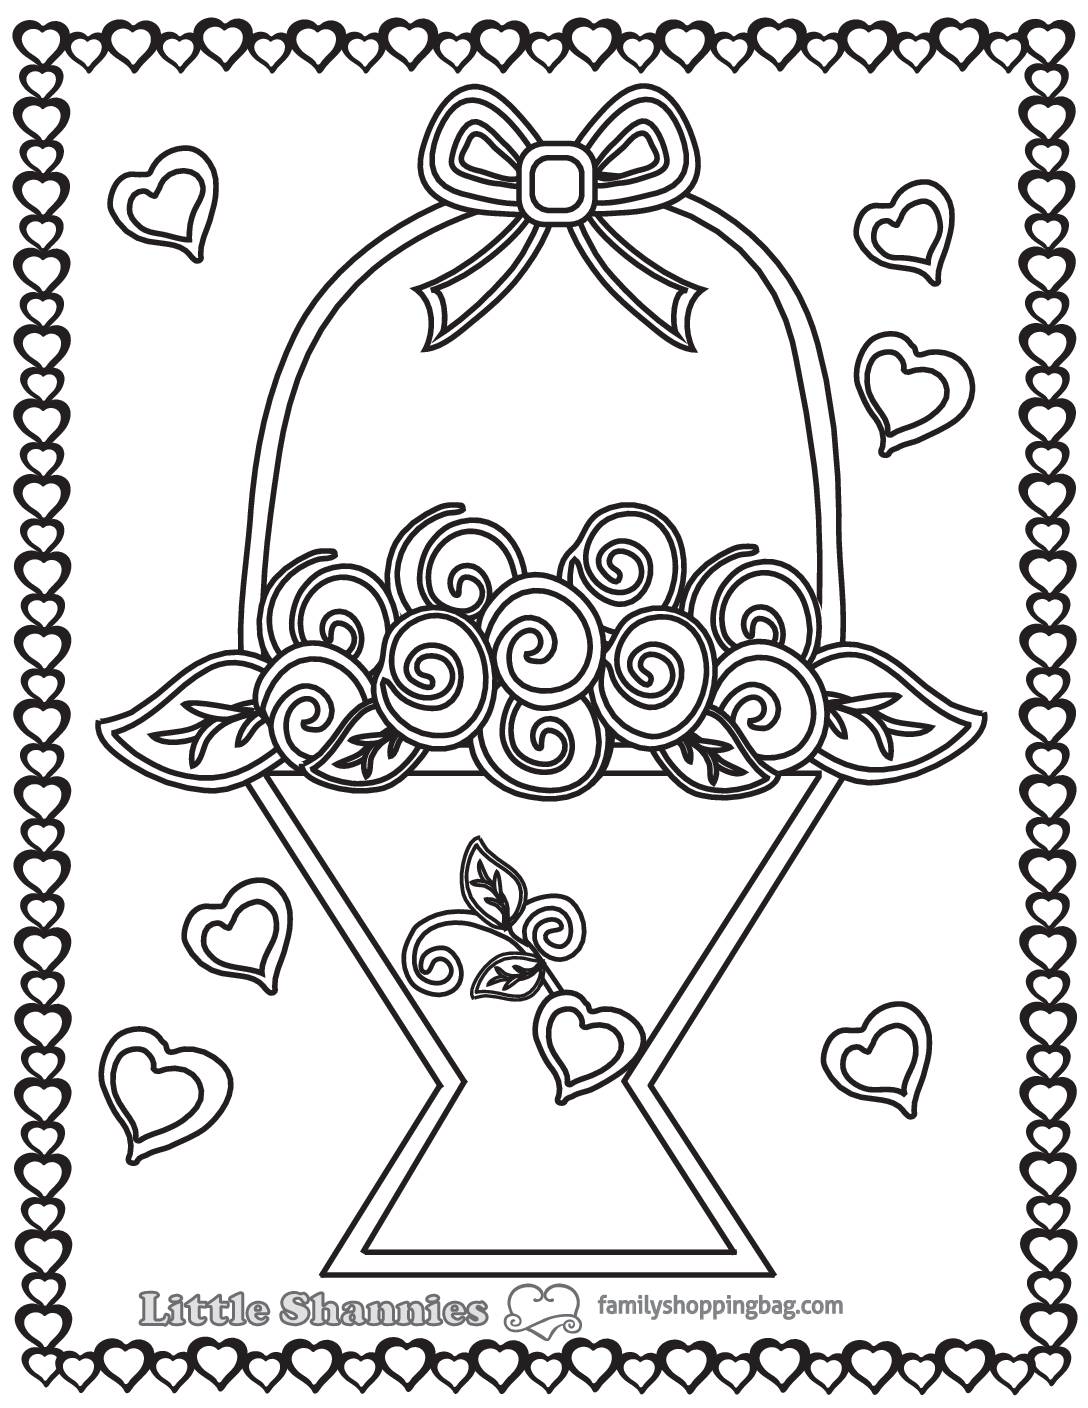 Coloring page 3